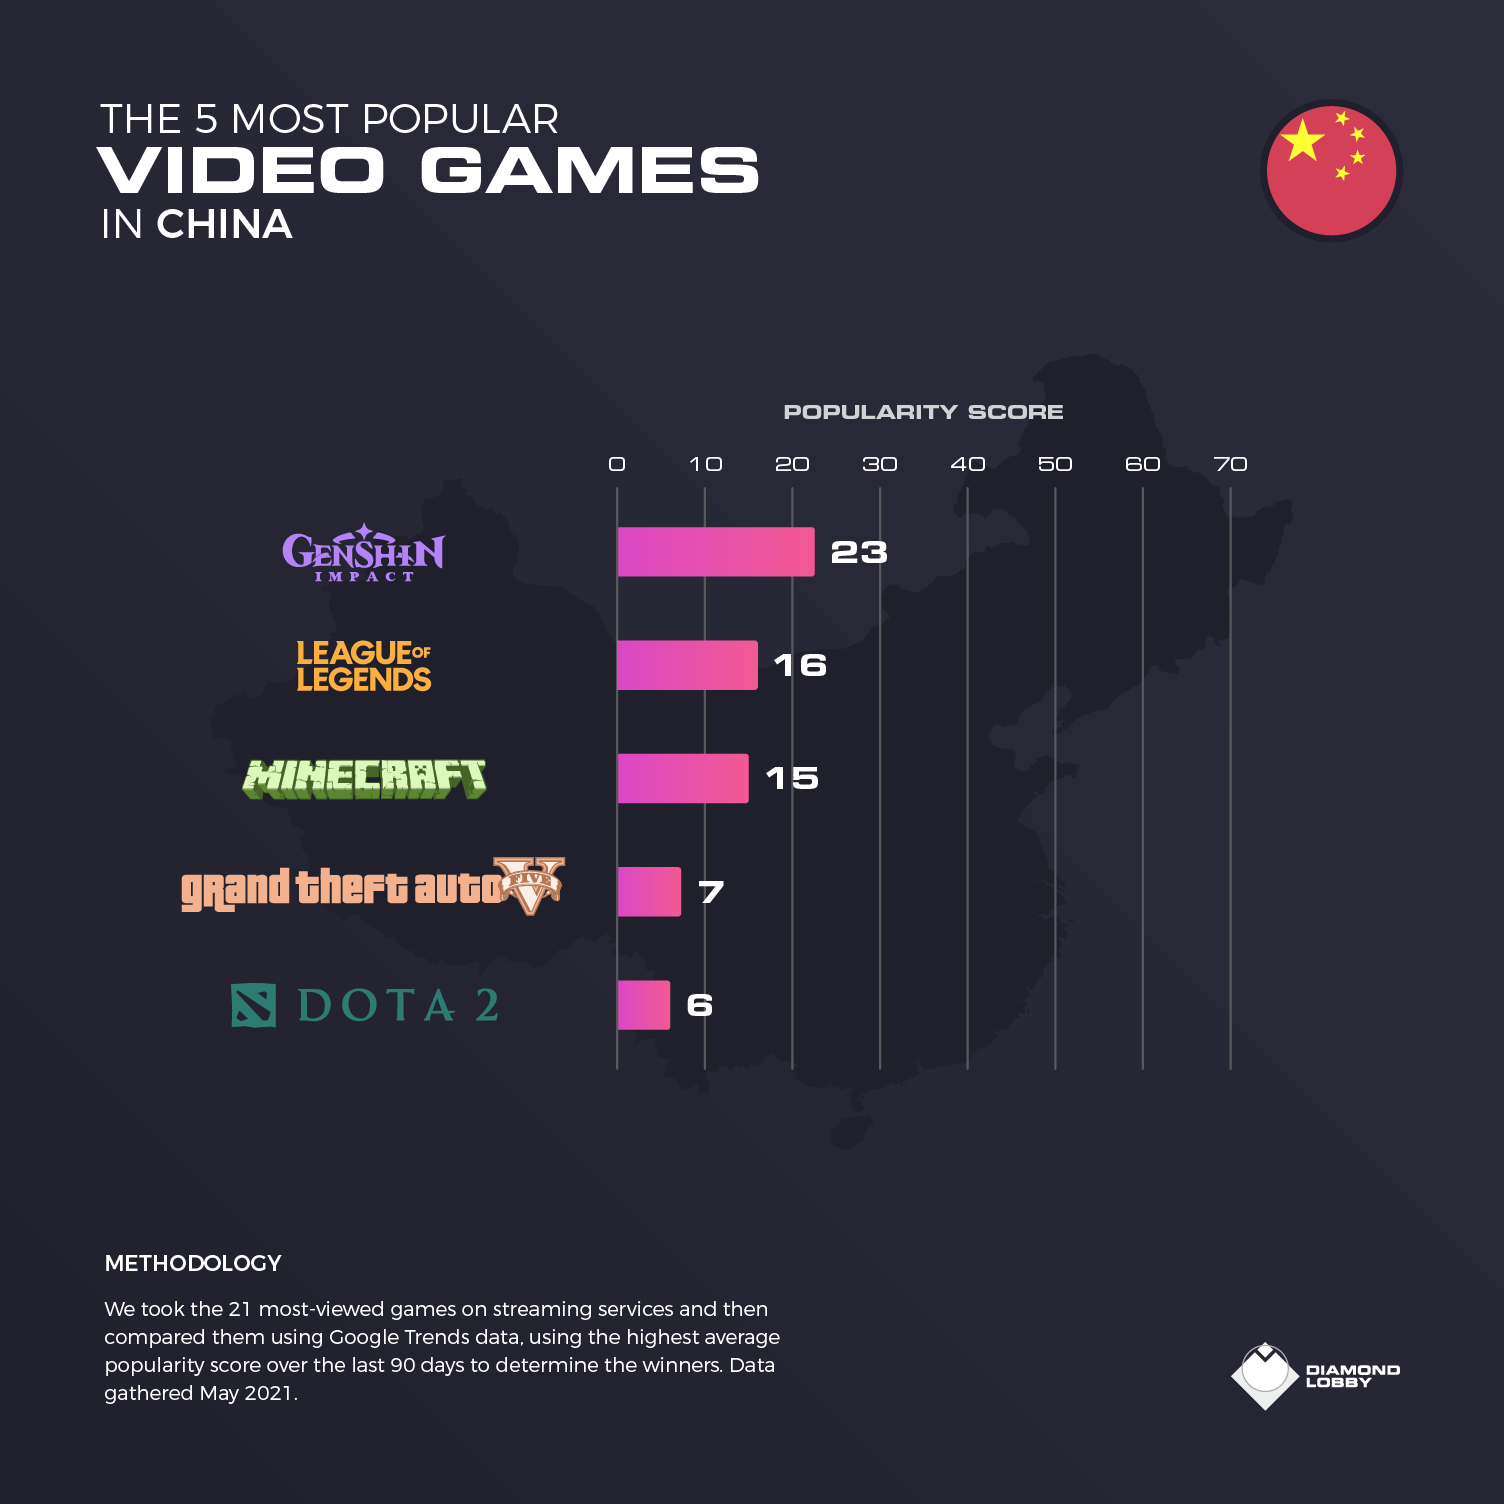 The top 5 video games in China